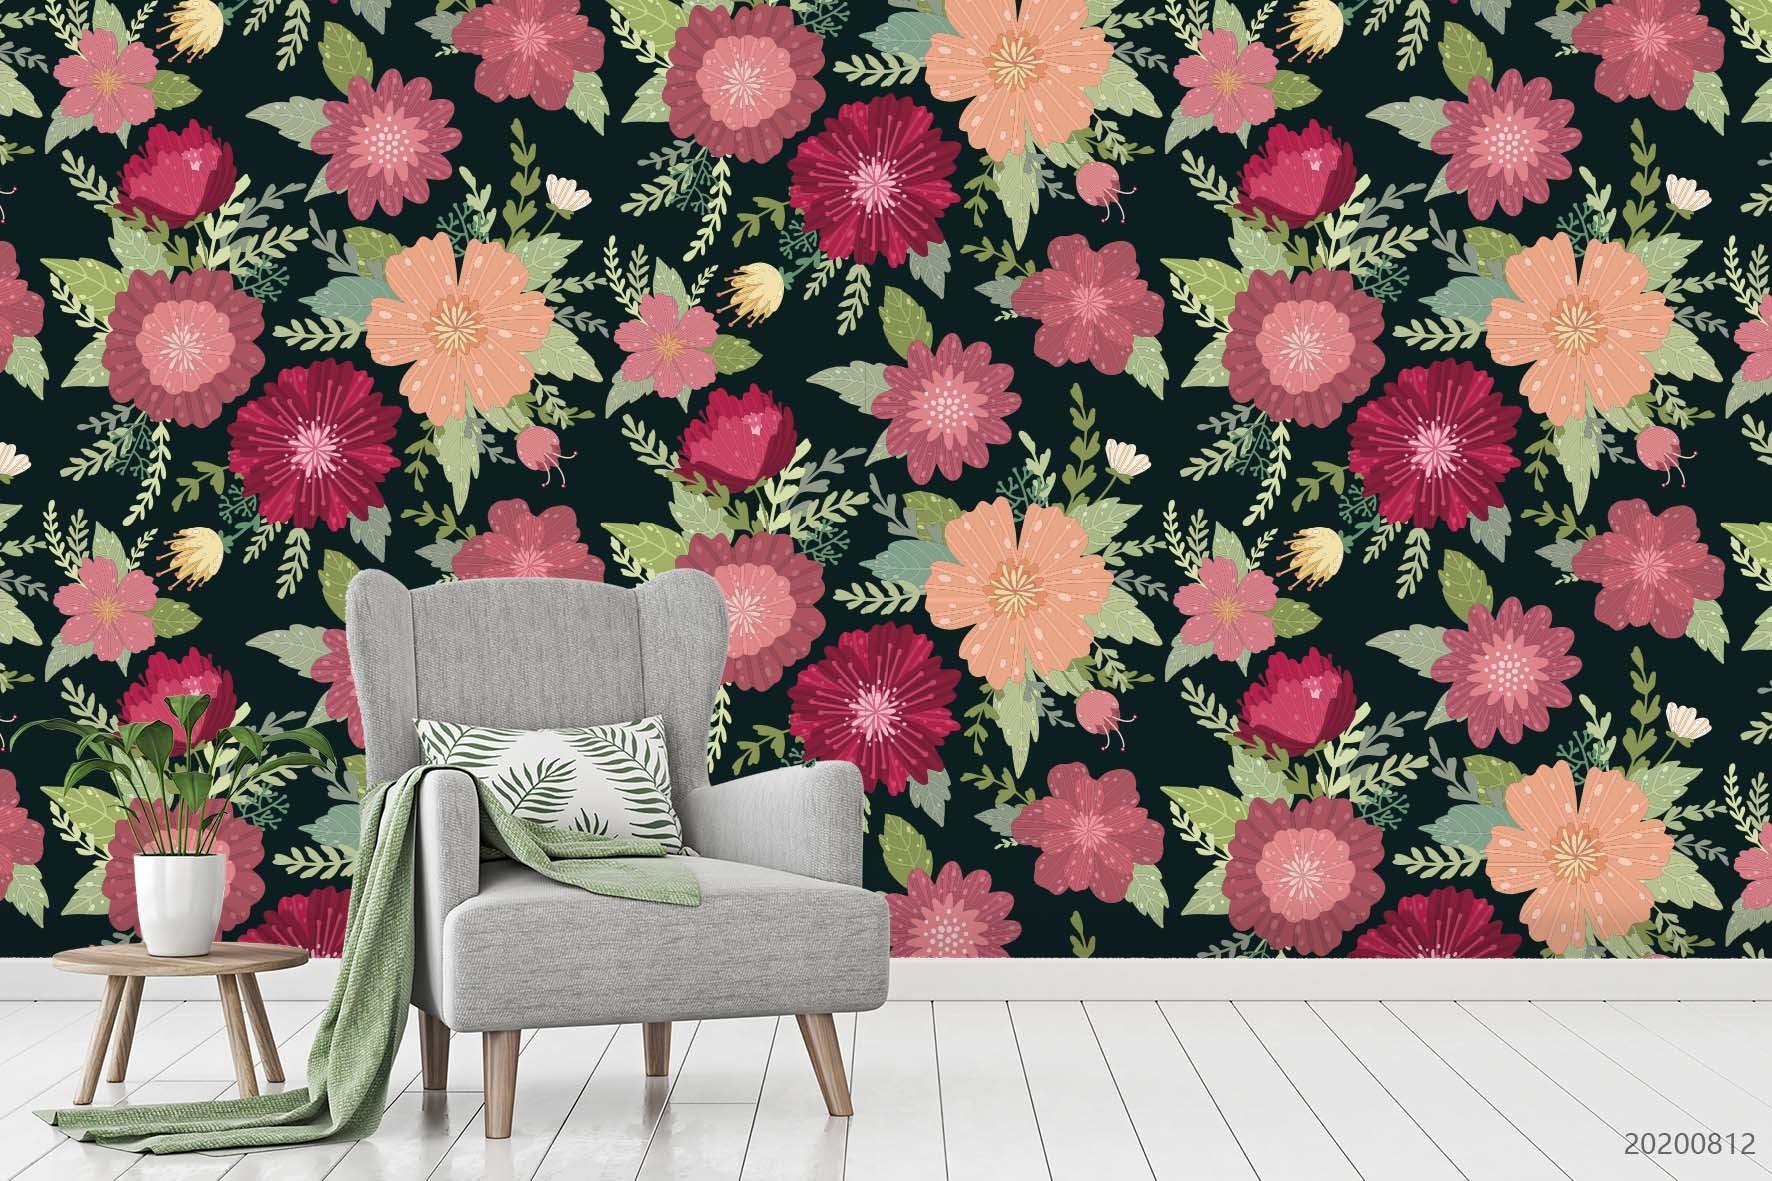 3D Hand Sketching Colorful Floral Wall Mural Wallpaper LXL 1092- Jess Art Decoration